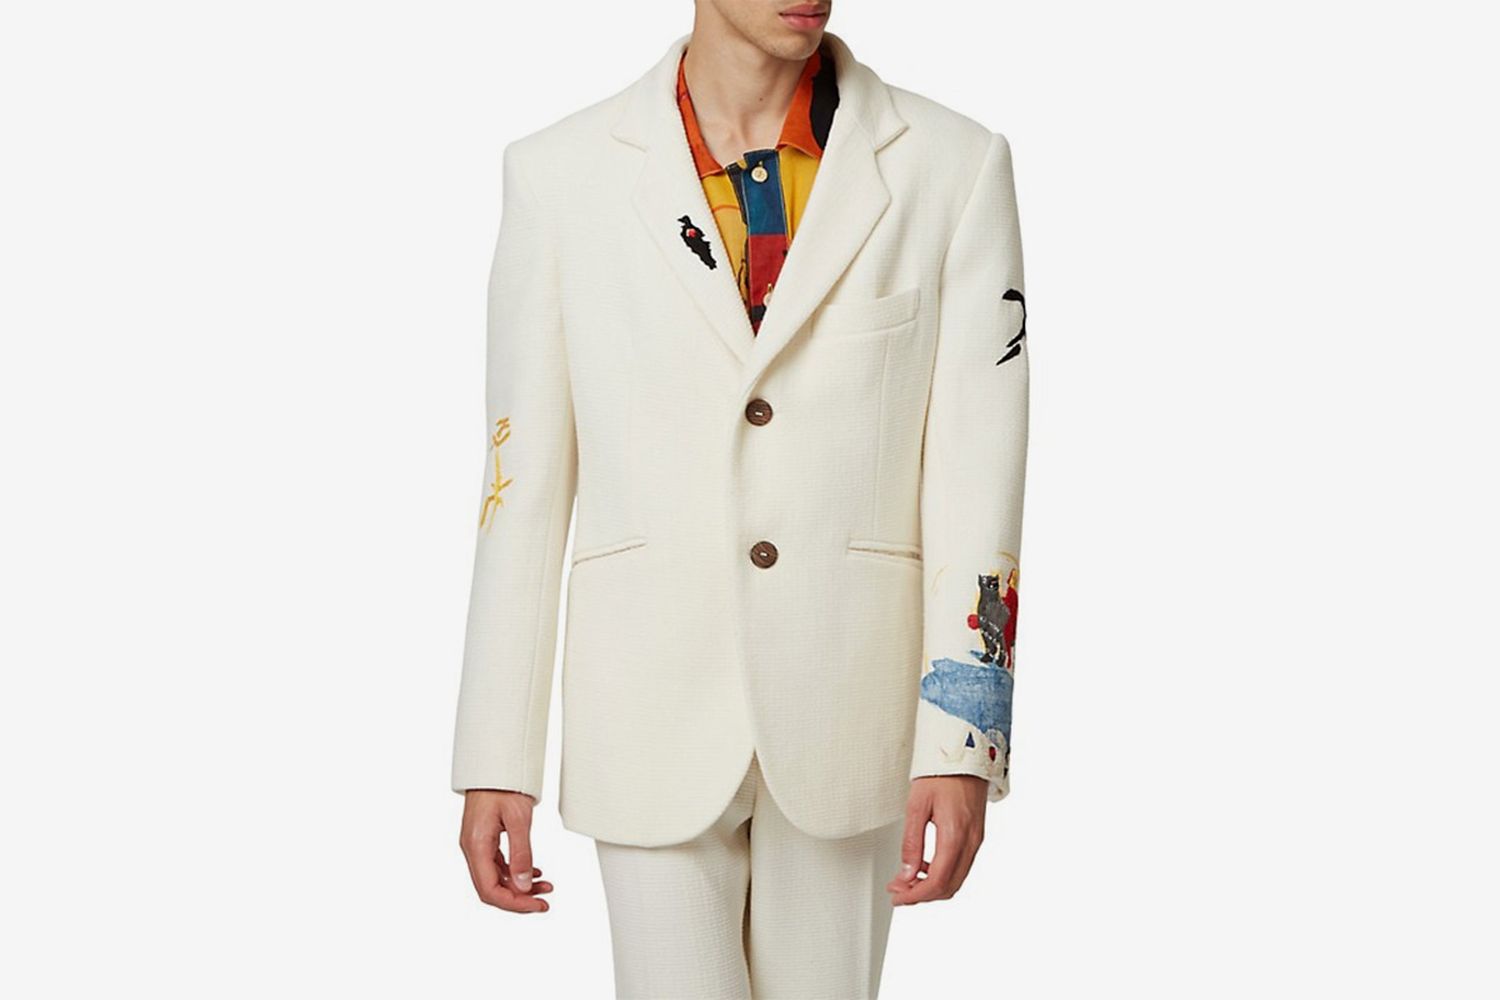 Embroidered Tailored Jacket